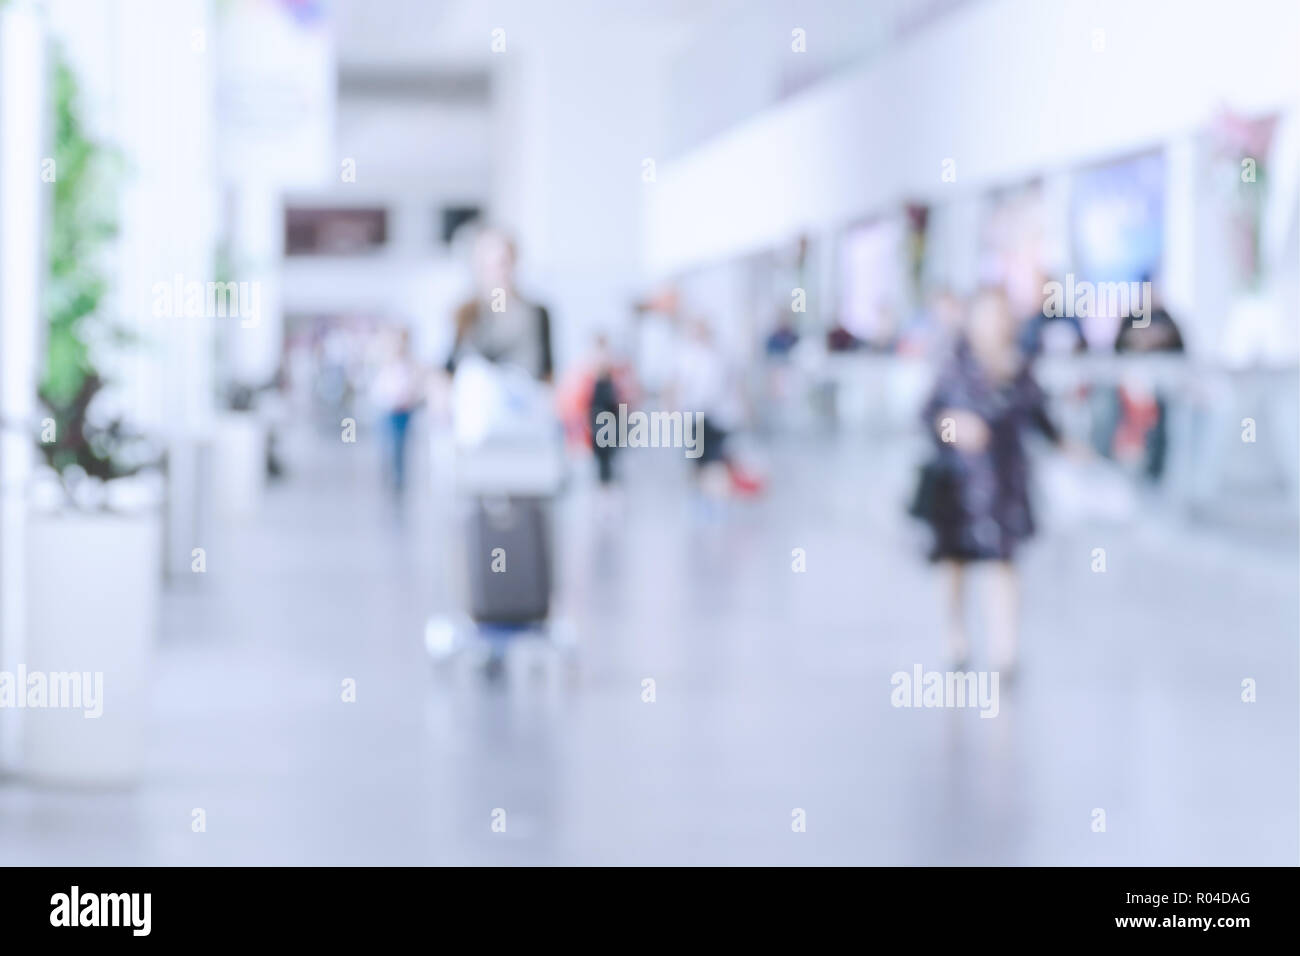 Blurred photo with people at airport, defocused silhouettes indoors, unrecognizable persons, abstract background with crowd, motion blur. Stock Photo